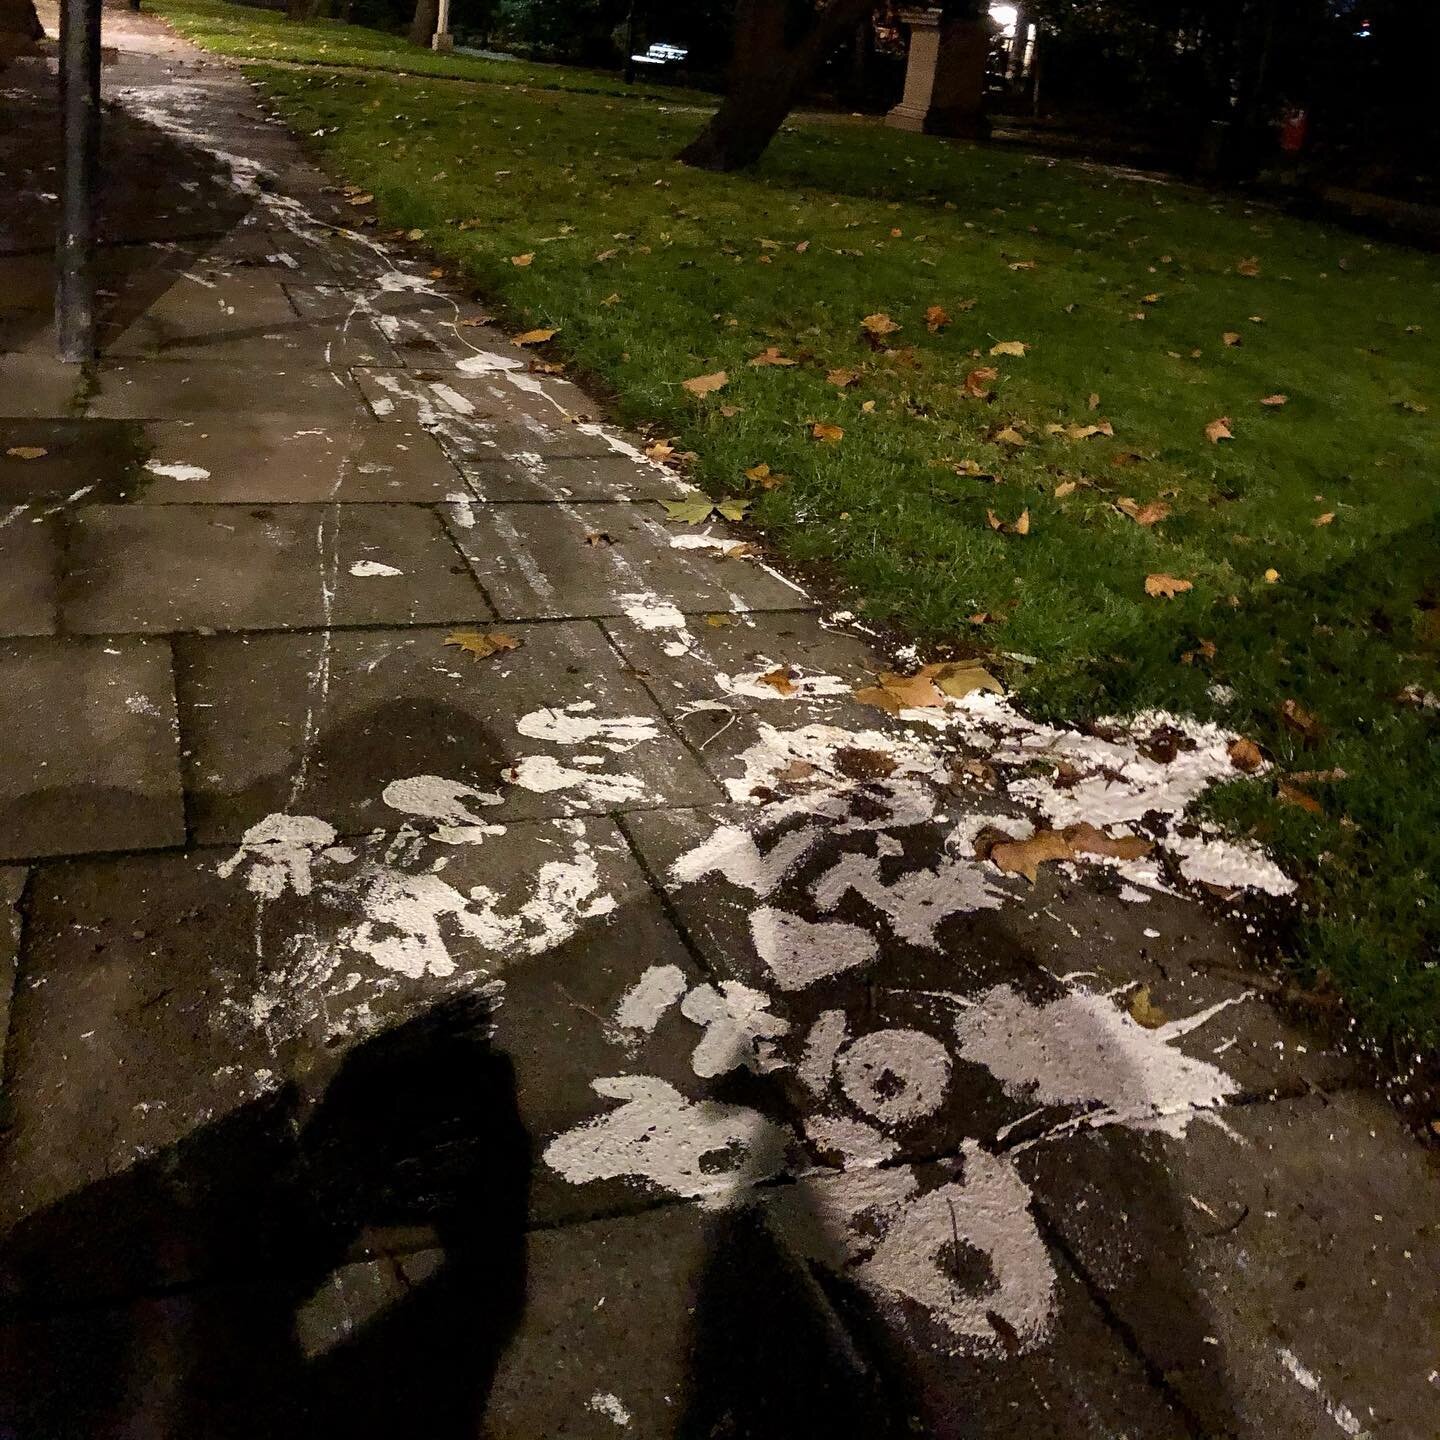 This was originally the result of an incident involving a bicycle and a can of paint (don&rsquo;t ask) 

I returned to the scene of the crime a week later to discover NN had turned my mess into a tribute to 2020.

Happy new year y&rsquo;all! Let&rsqu